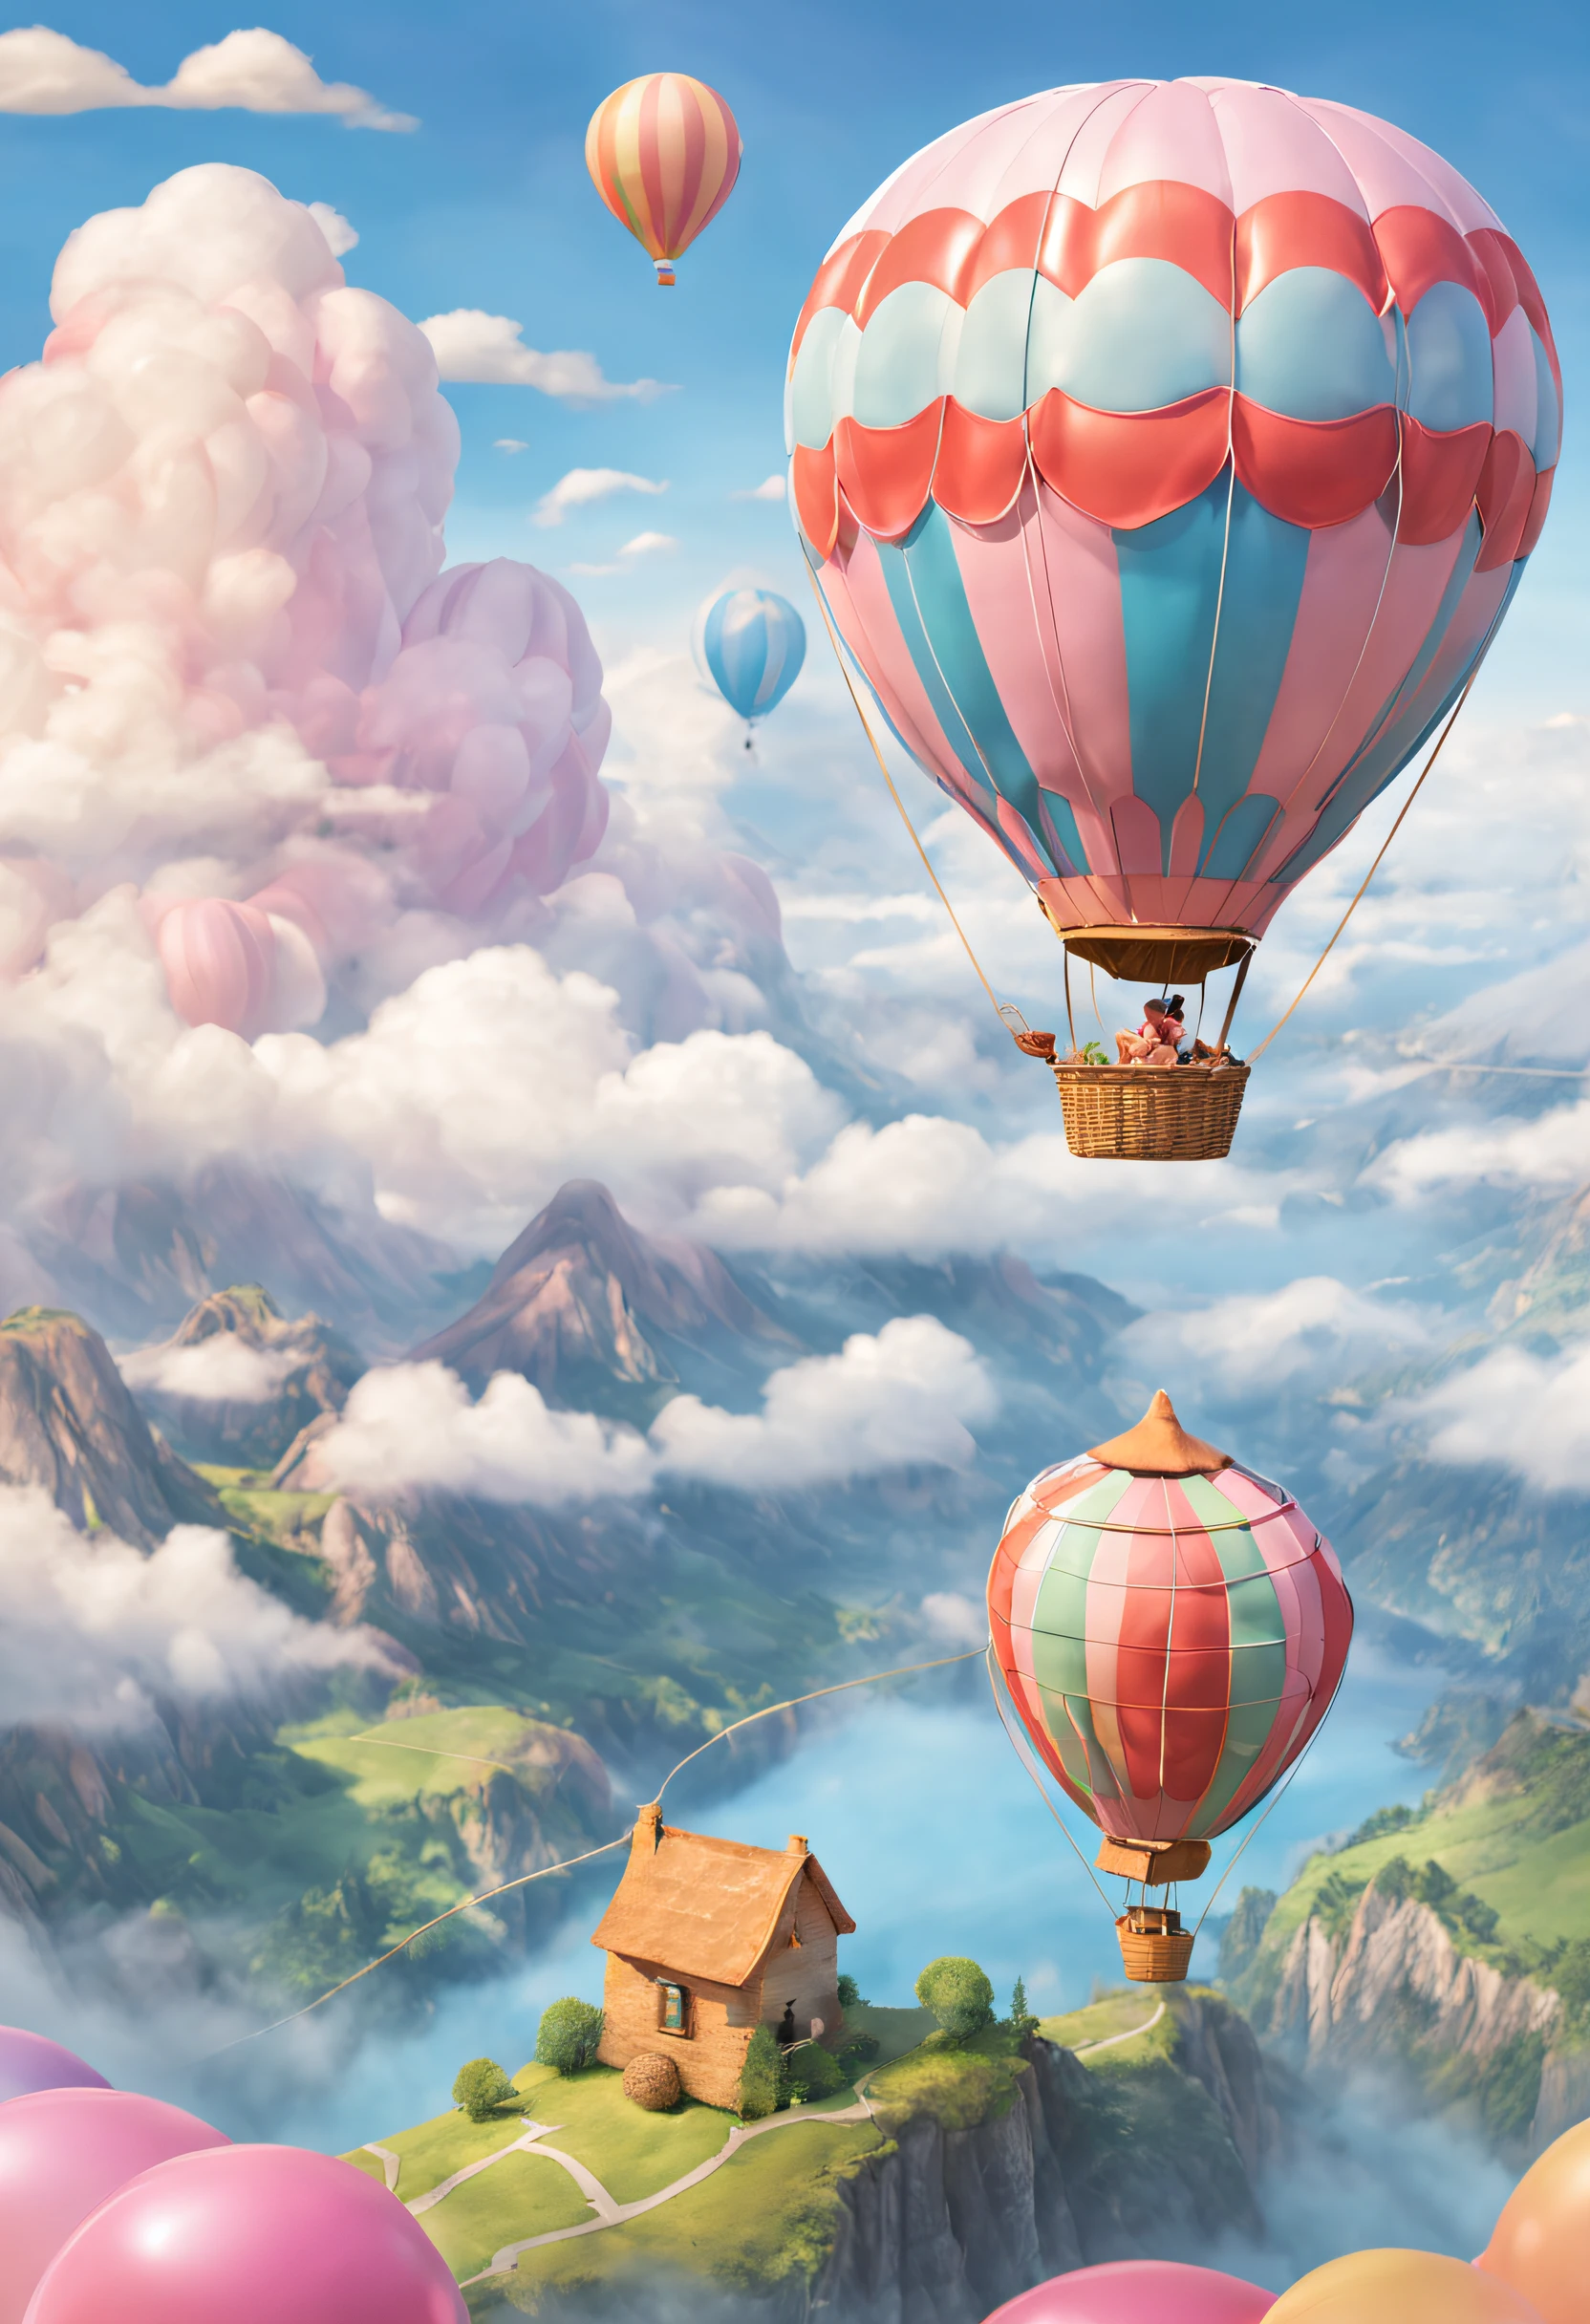 Breezy the Balloon! 🎈🌤️ Breezy is a playful, pastel-colored hot air balloon character with a cute smiling face and rosy cheeks. She sports a striped pattern and a woven basket with a tiny flag. Breezy enjoys floating high above the clouds, sharing breathtaking views and thrilling escapades with her friends.